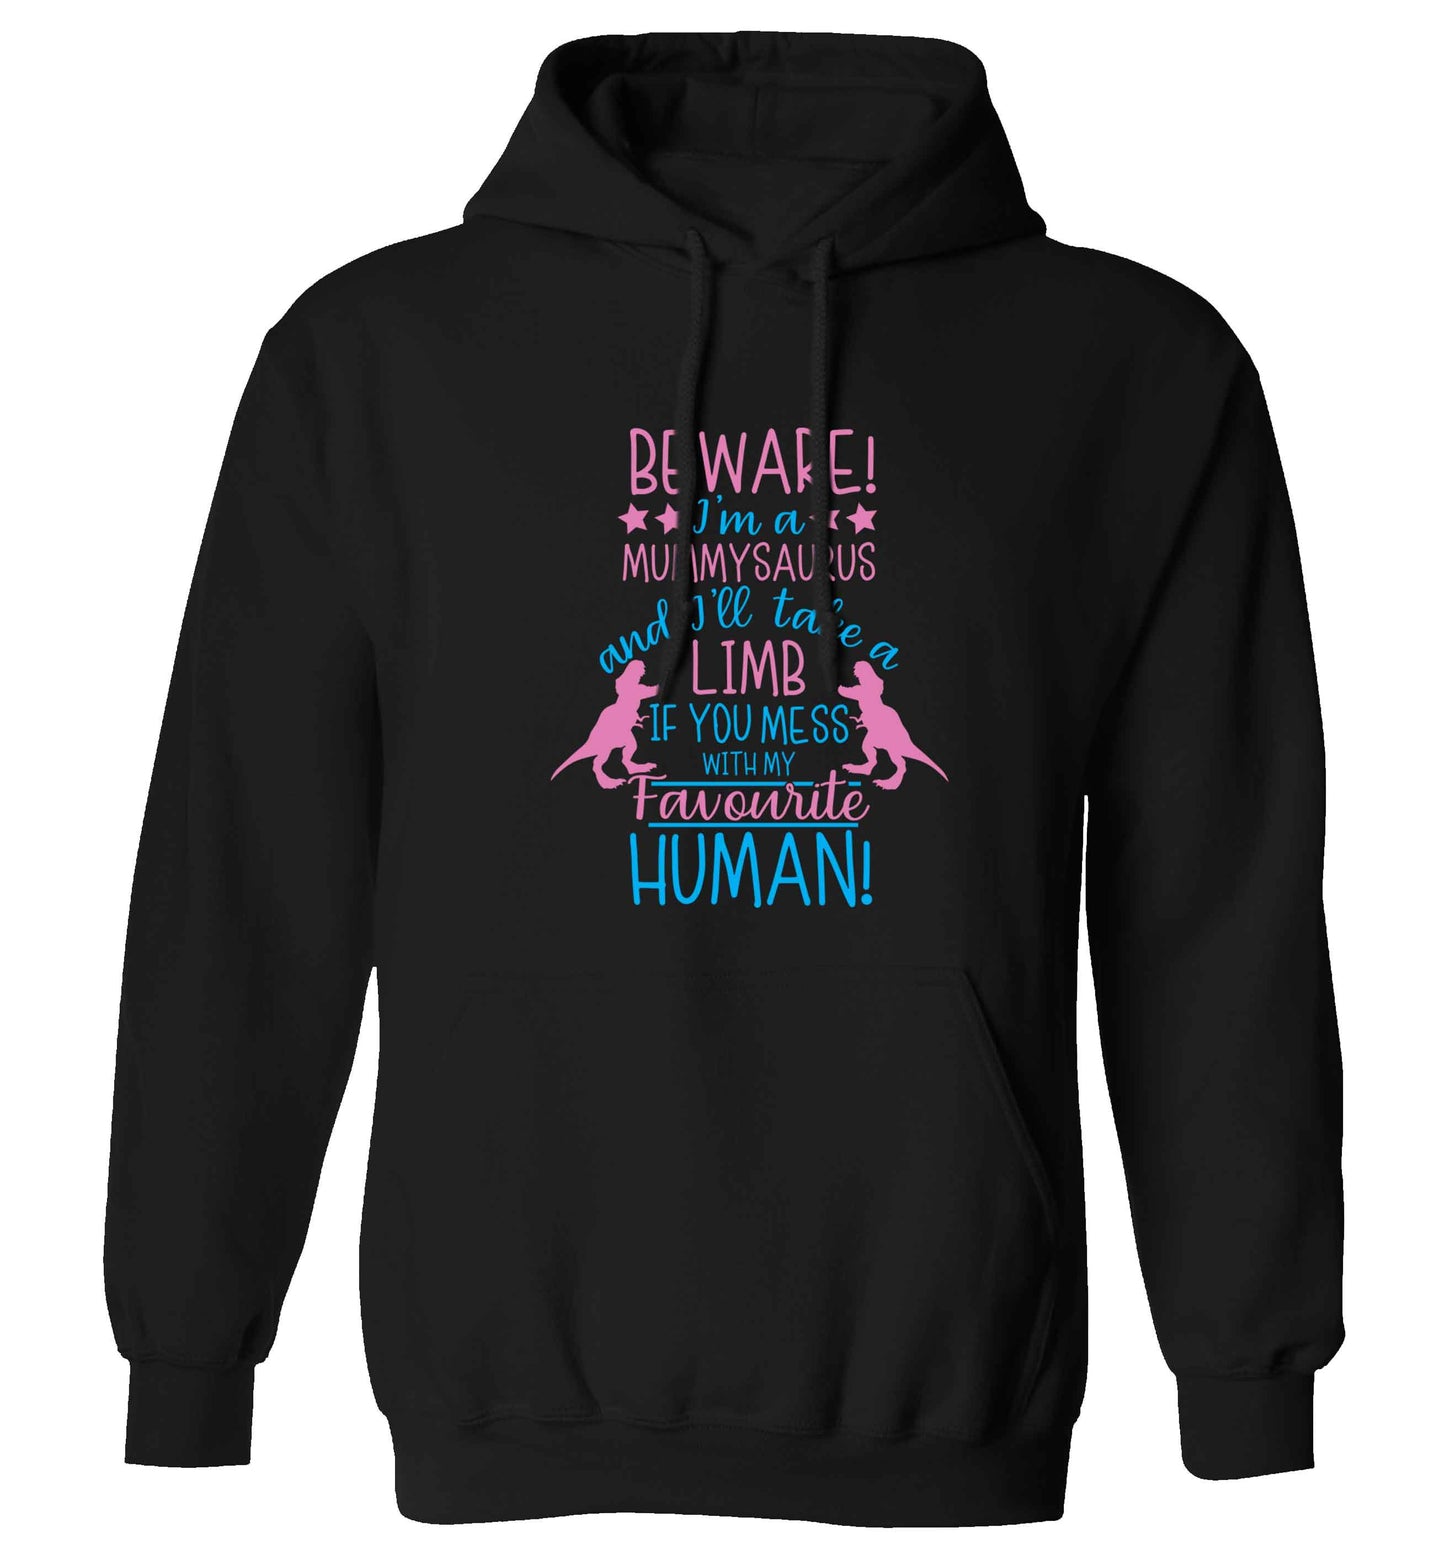 Perfect gift for any protective mummysaurus! Beware I'm a mummysaurus and I'll take a limb if you mess with my favourite human adults unisex black hoodie 2XL